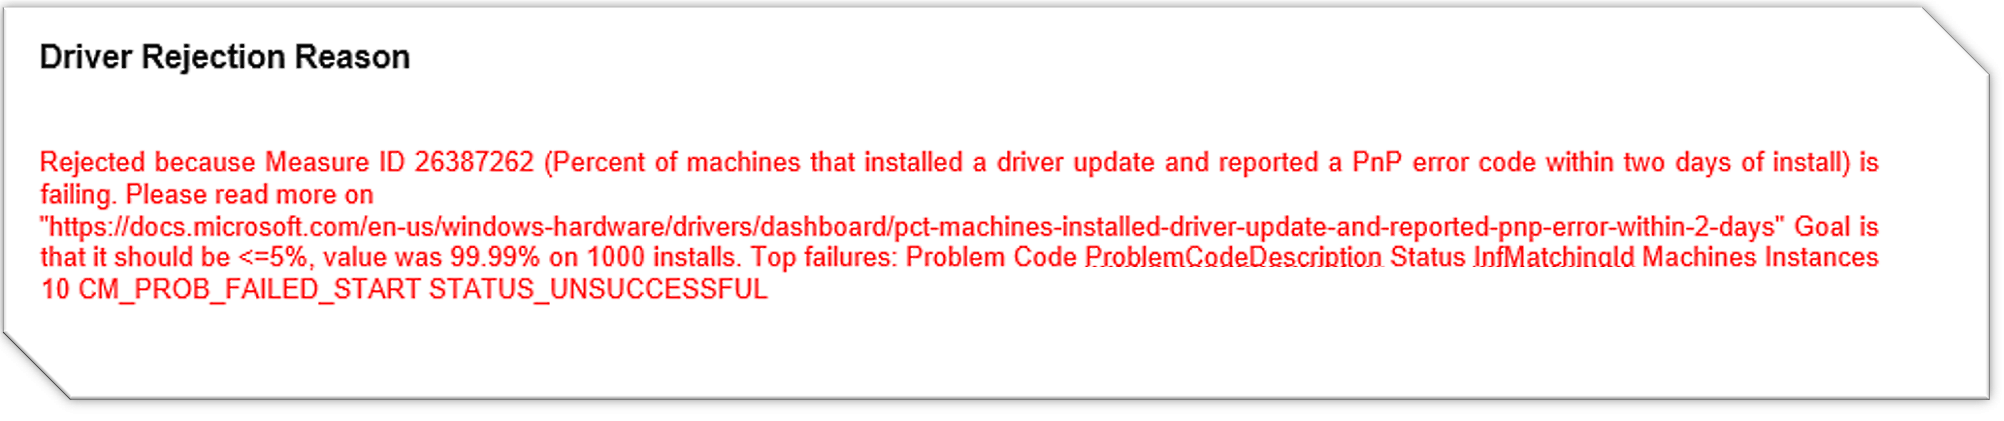 Screenshot of the Driver Rejection Reason section.